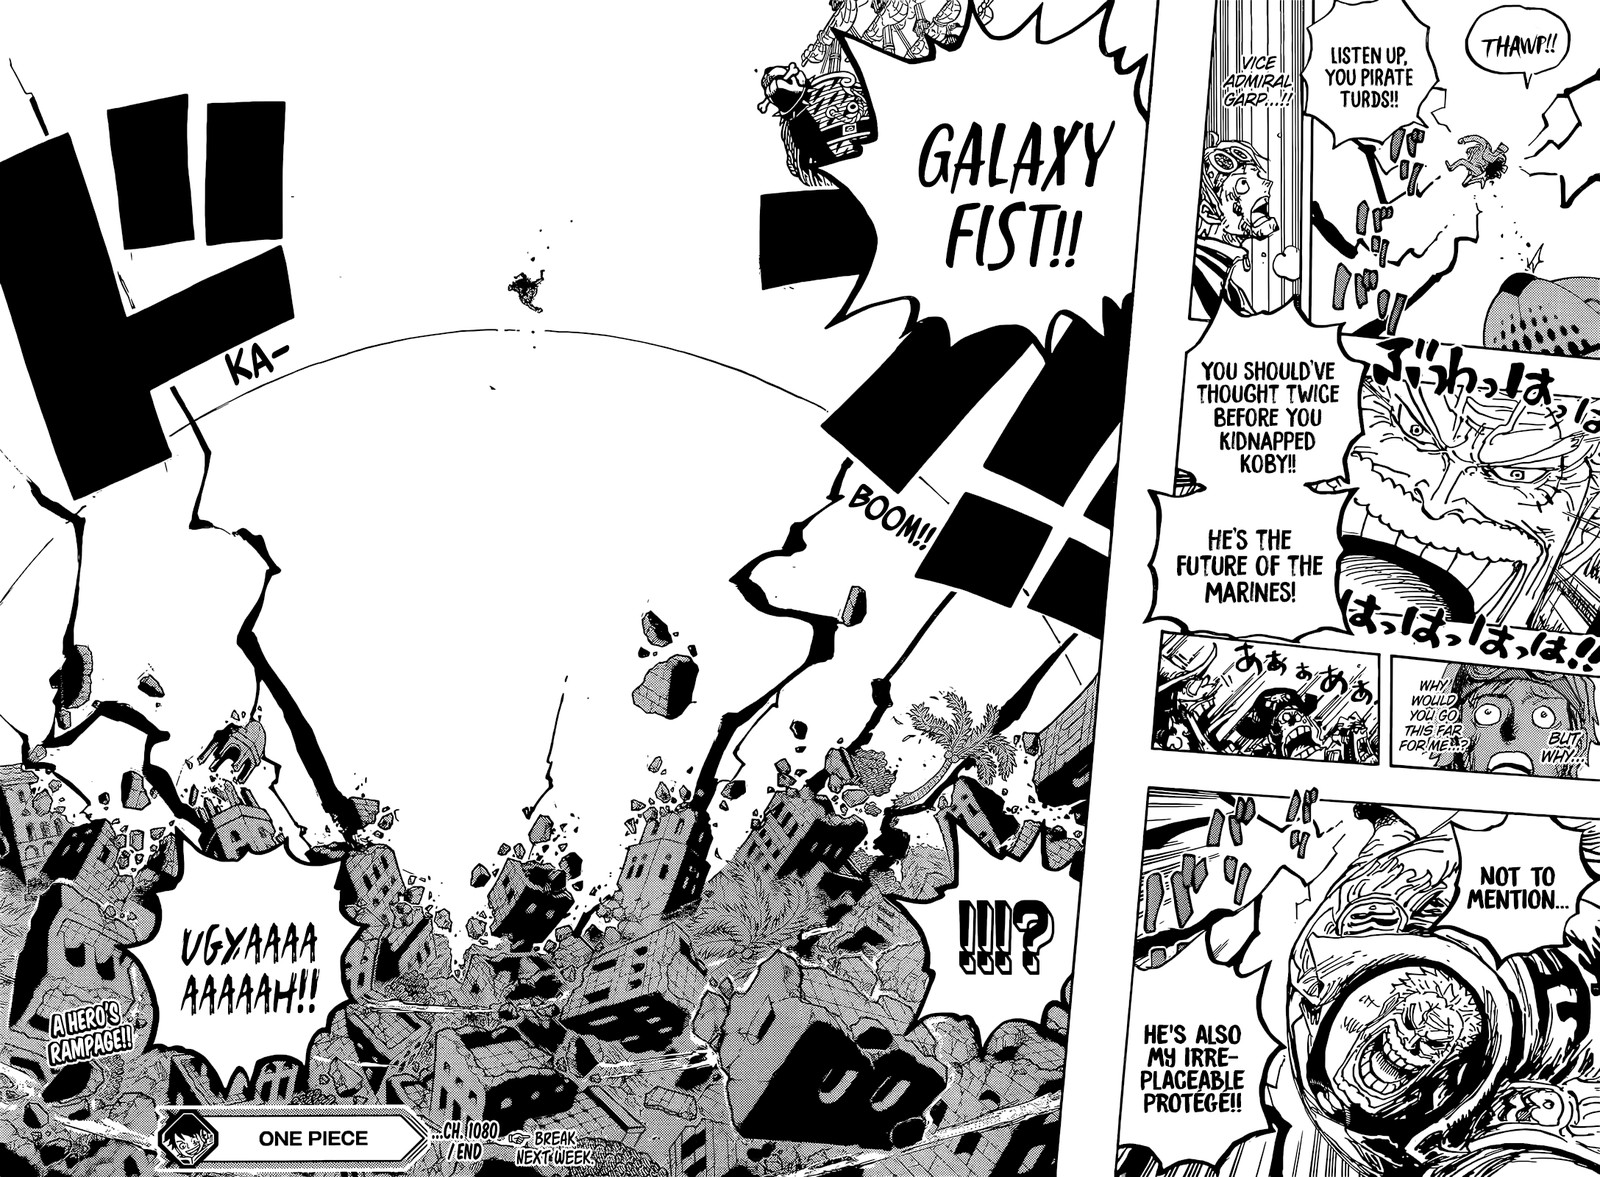 One piece, CHapter 1080 image one_piece_1080_15